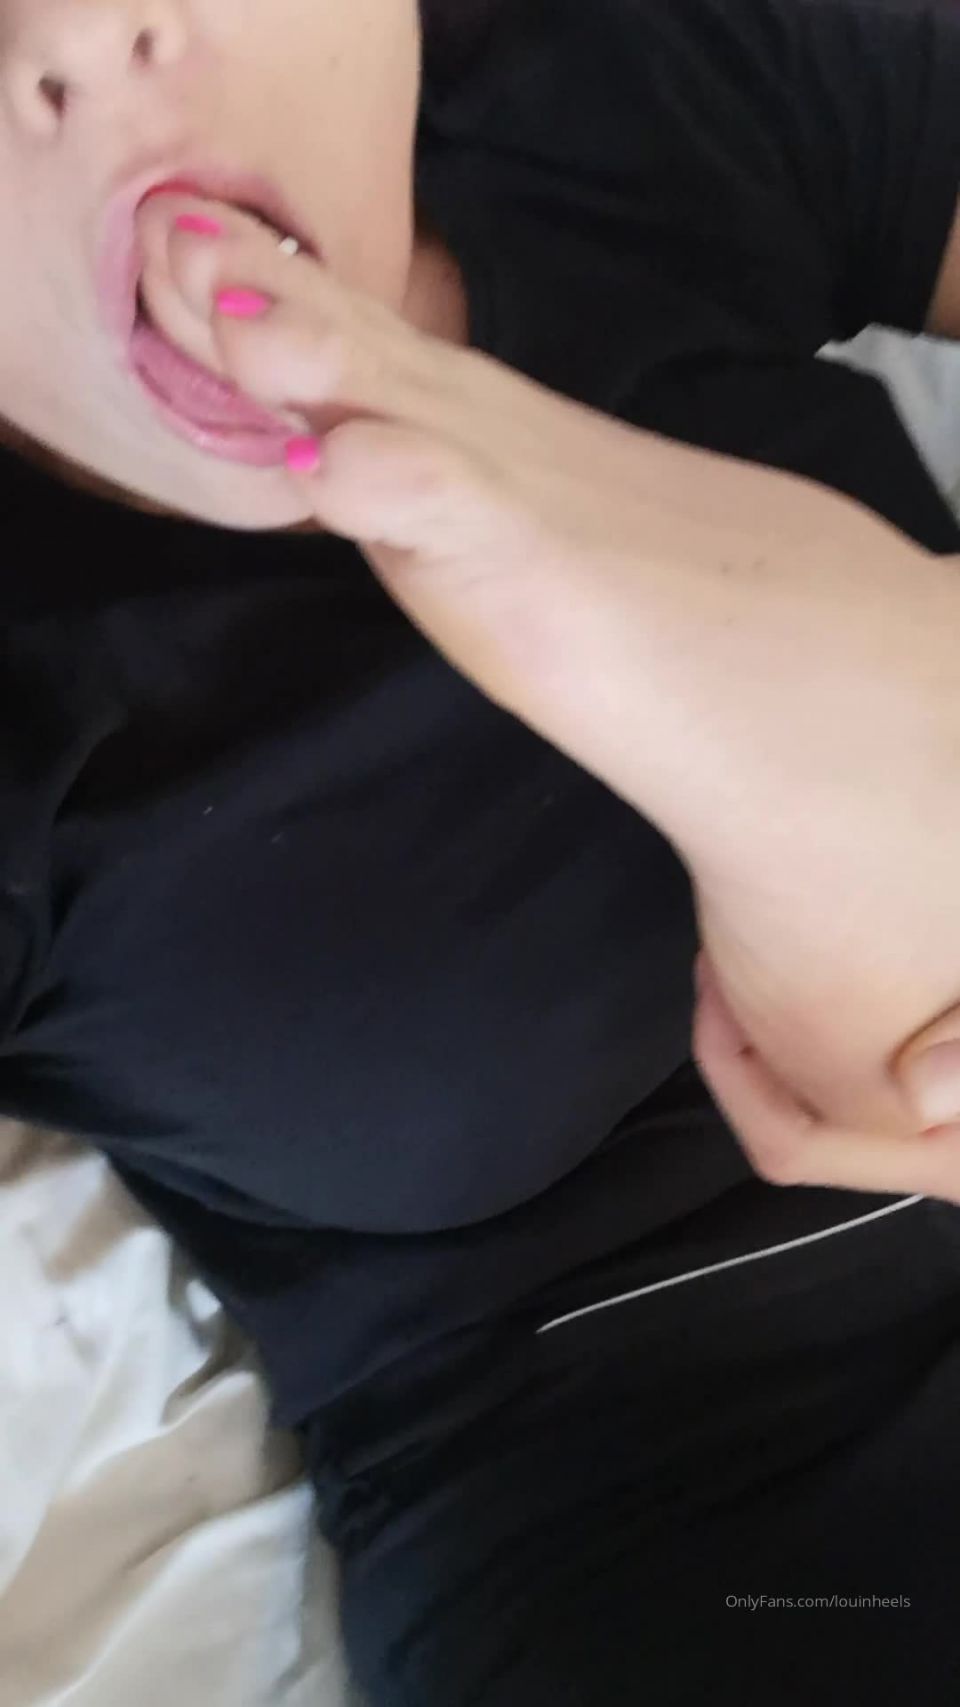 Lou In Heels () Louinheels - a little bit of self worship never fails to get someone going 29-11-2019